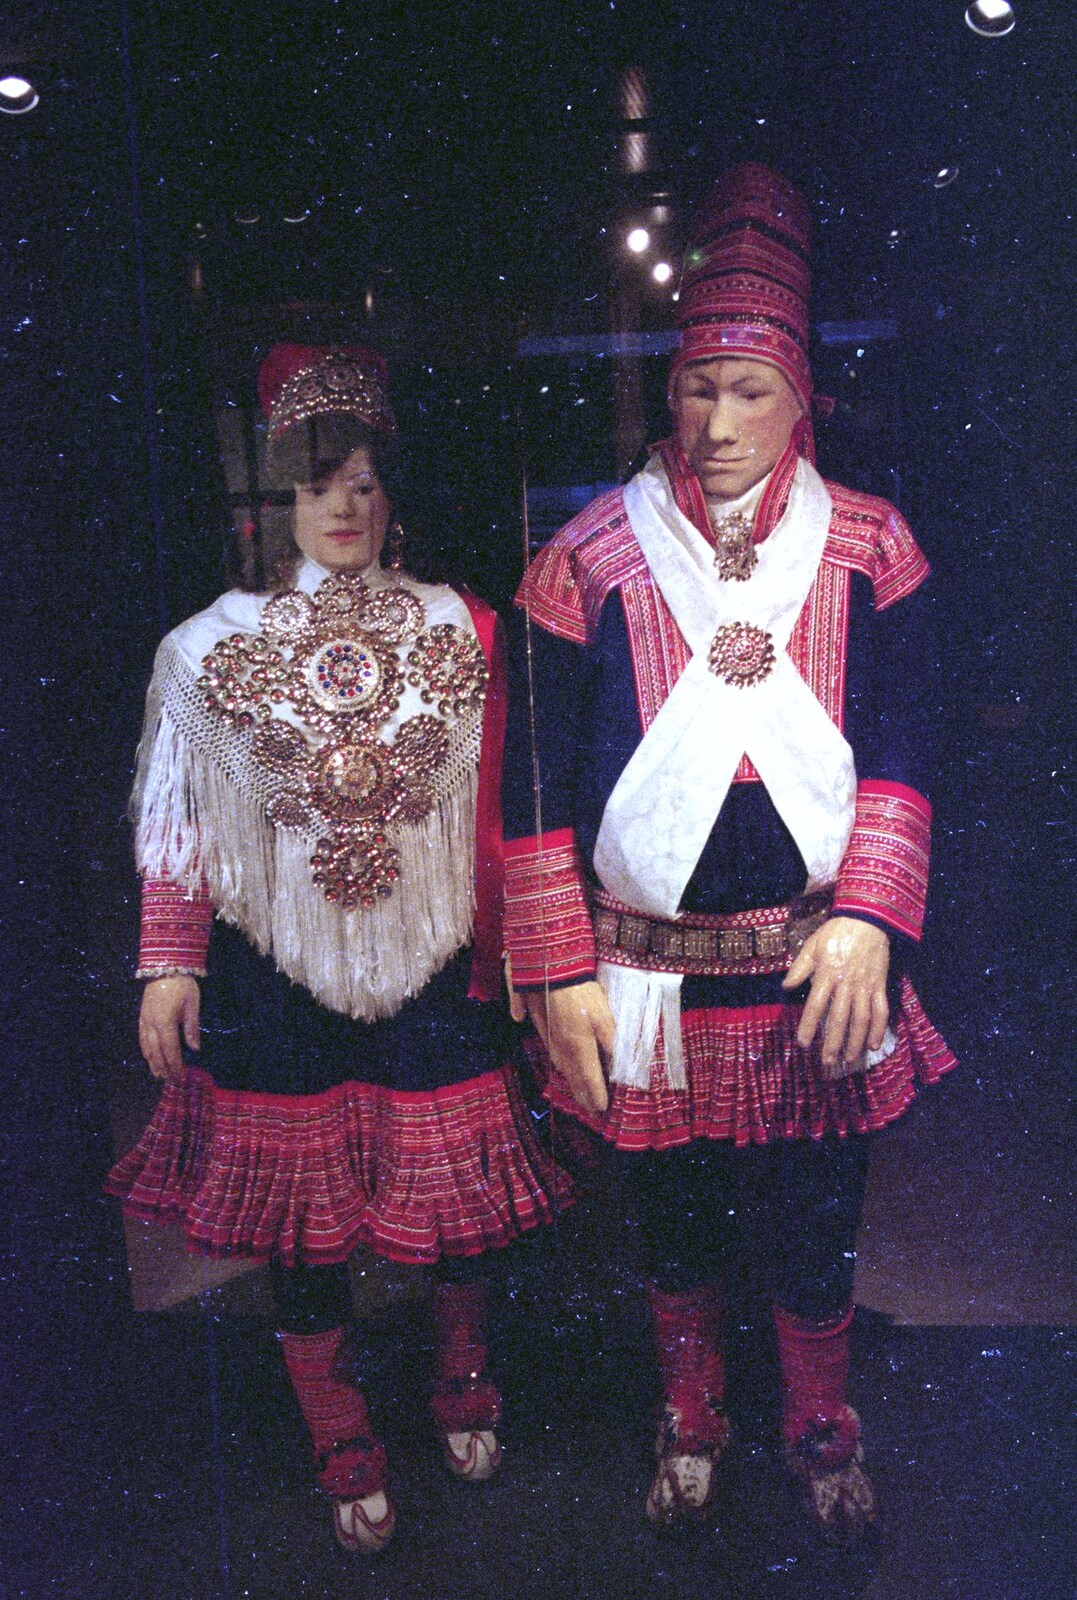 A display of traditional Sami dress from A Trip to Rovaniemi and the Arctic Circle, Lapland, Finland - 28th November 1999